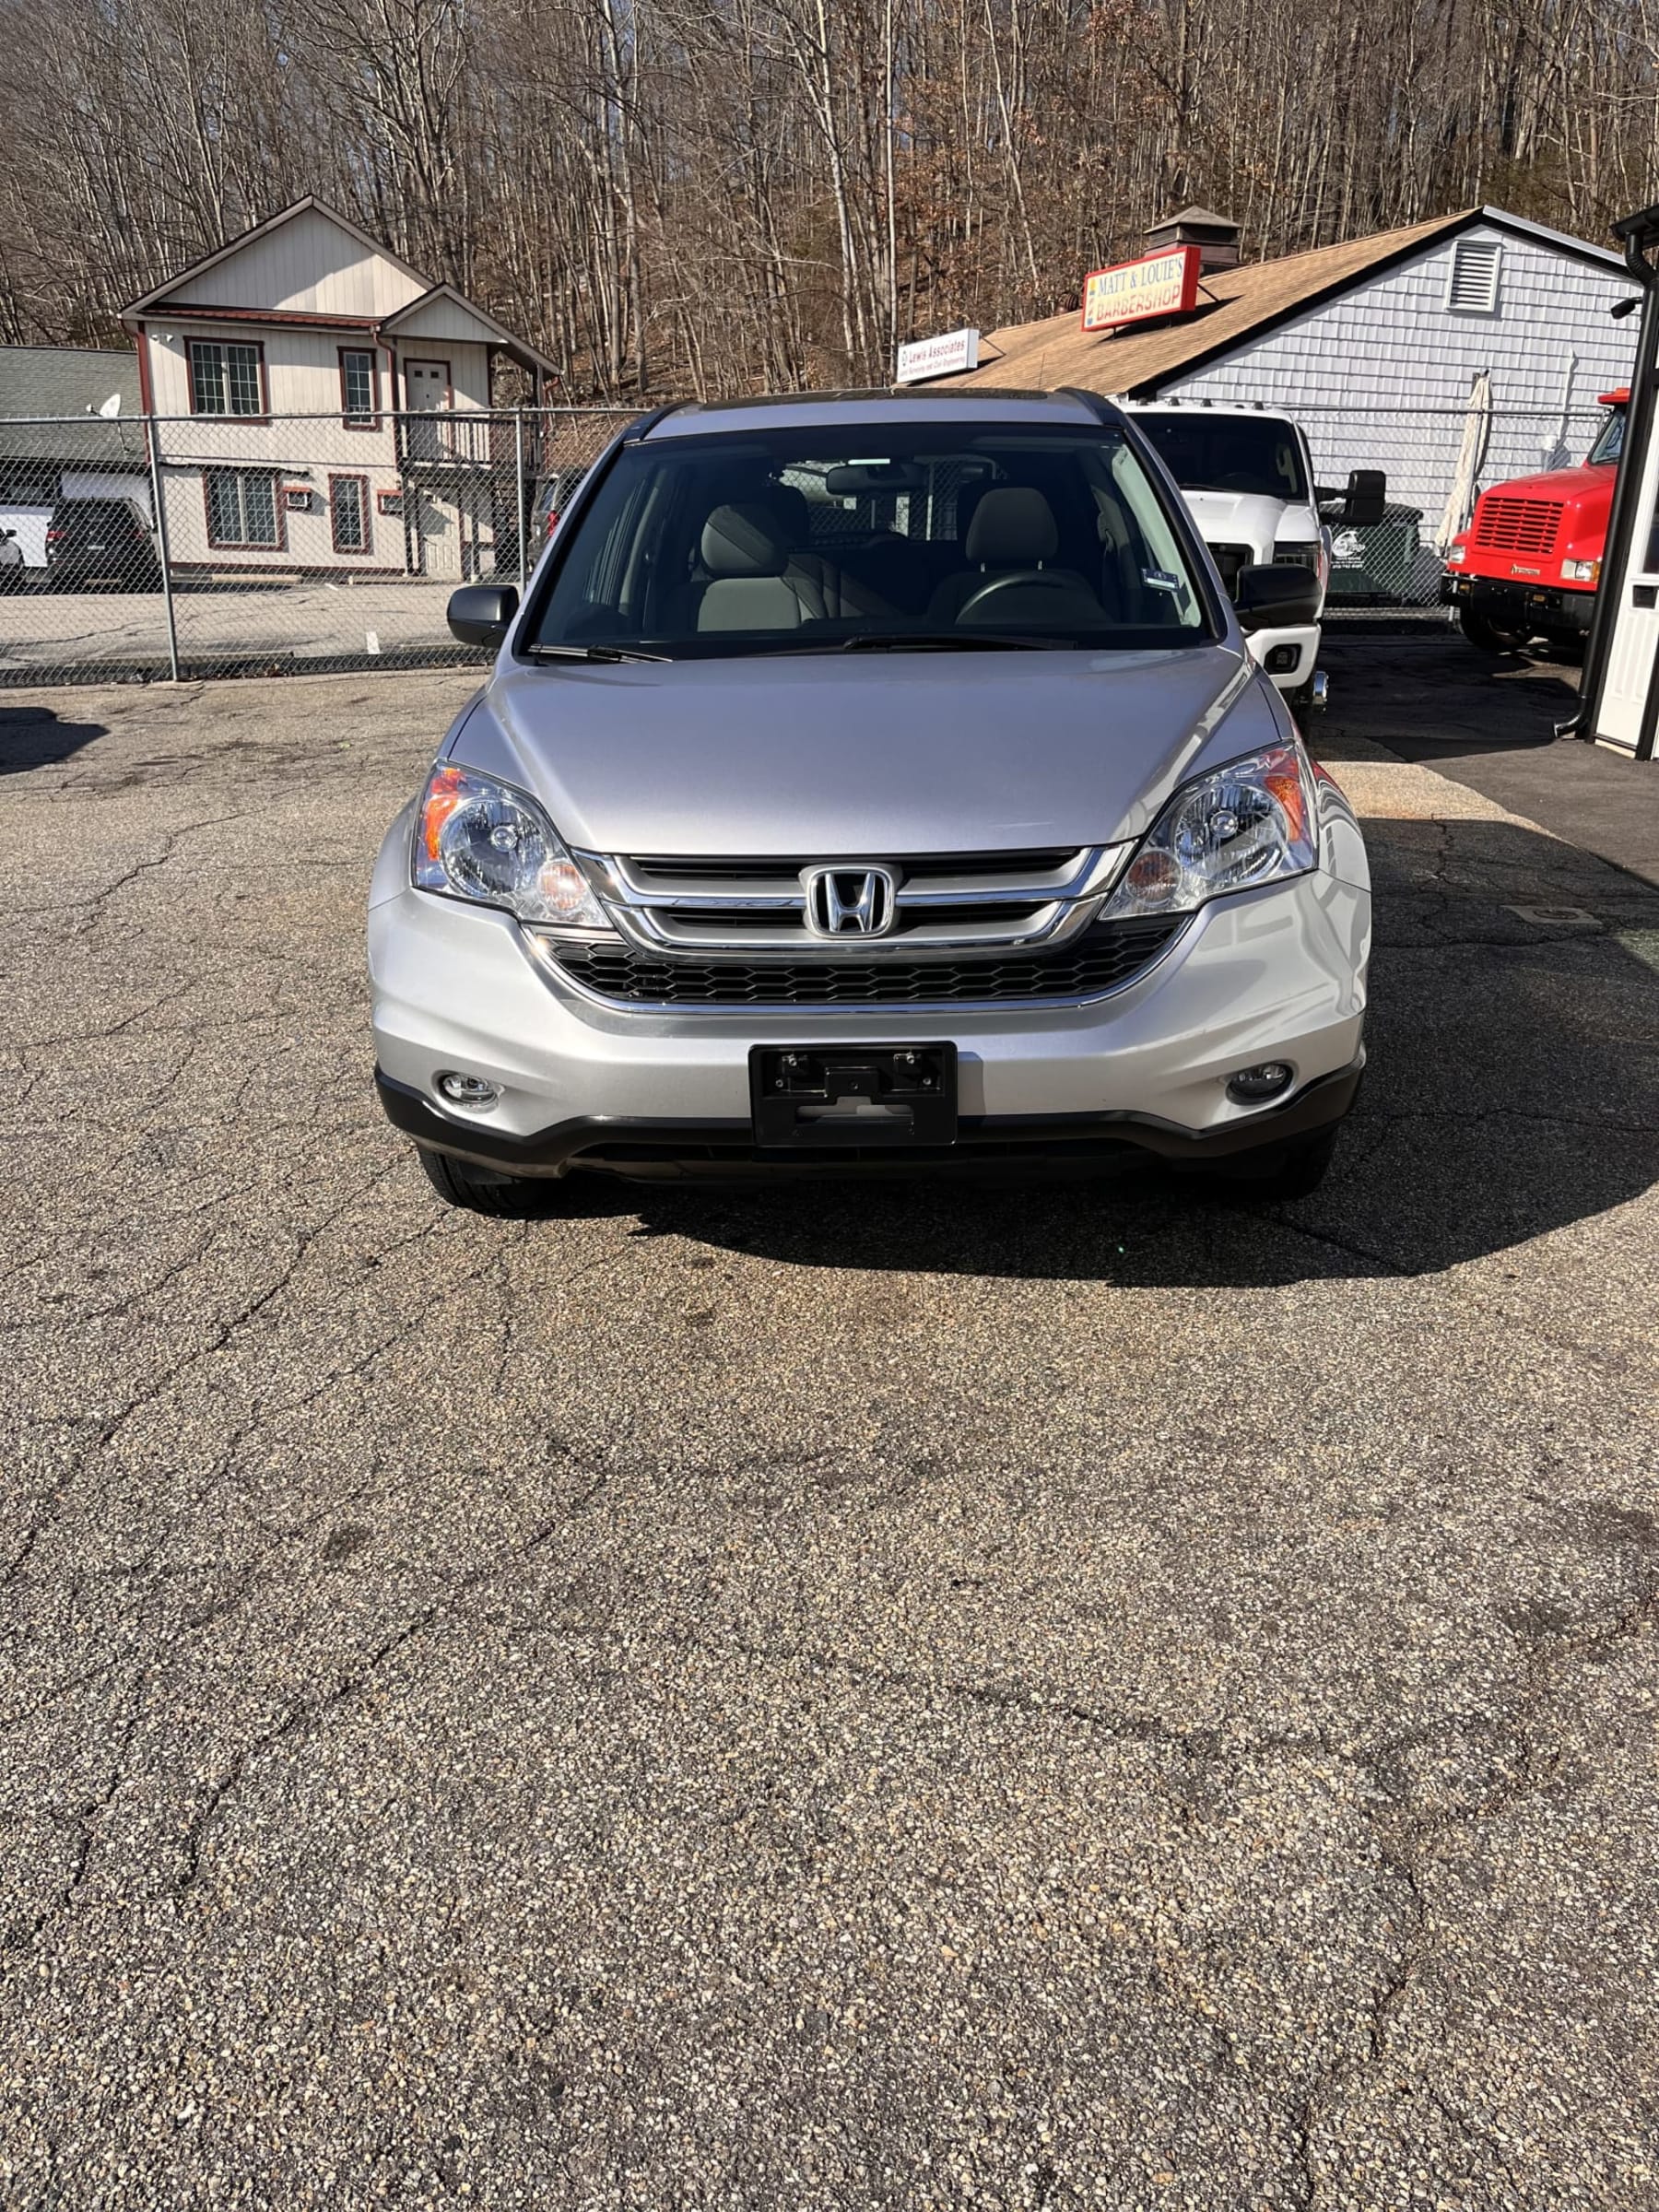 NEW ARRIVAL!! 2011 Honda CRV-EX!! Clean carfax! AWD! Moonroof! Runs and drives new!! ONLY 65k miles!! Won’t find a cleaner more reliable car at only $13,900! Won’t last!